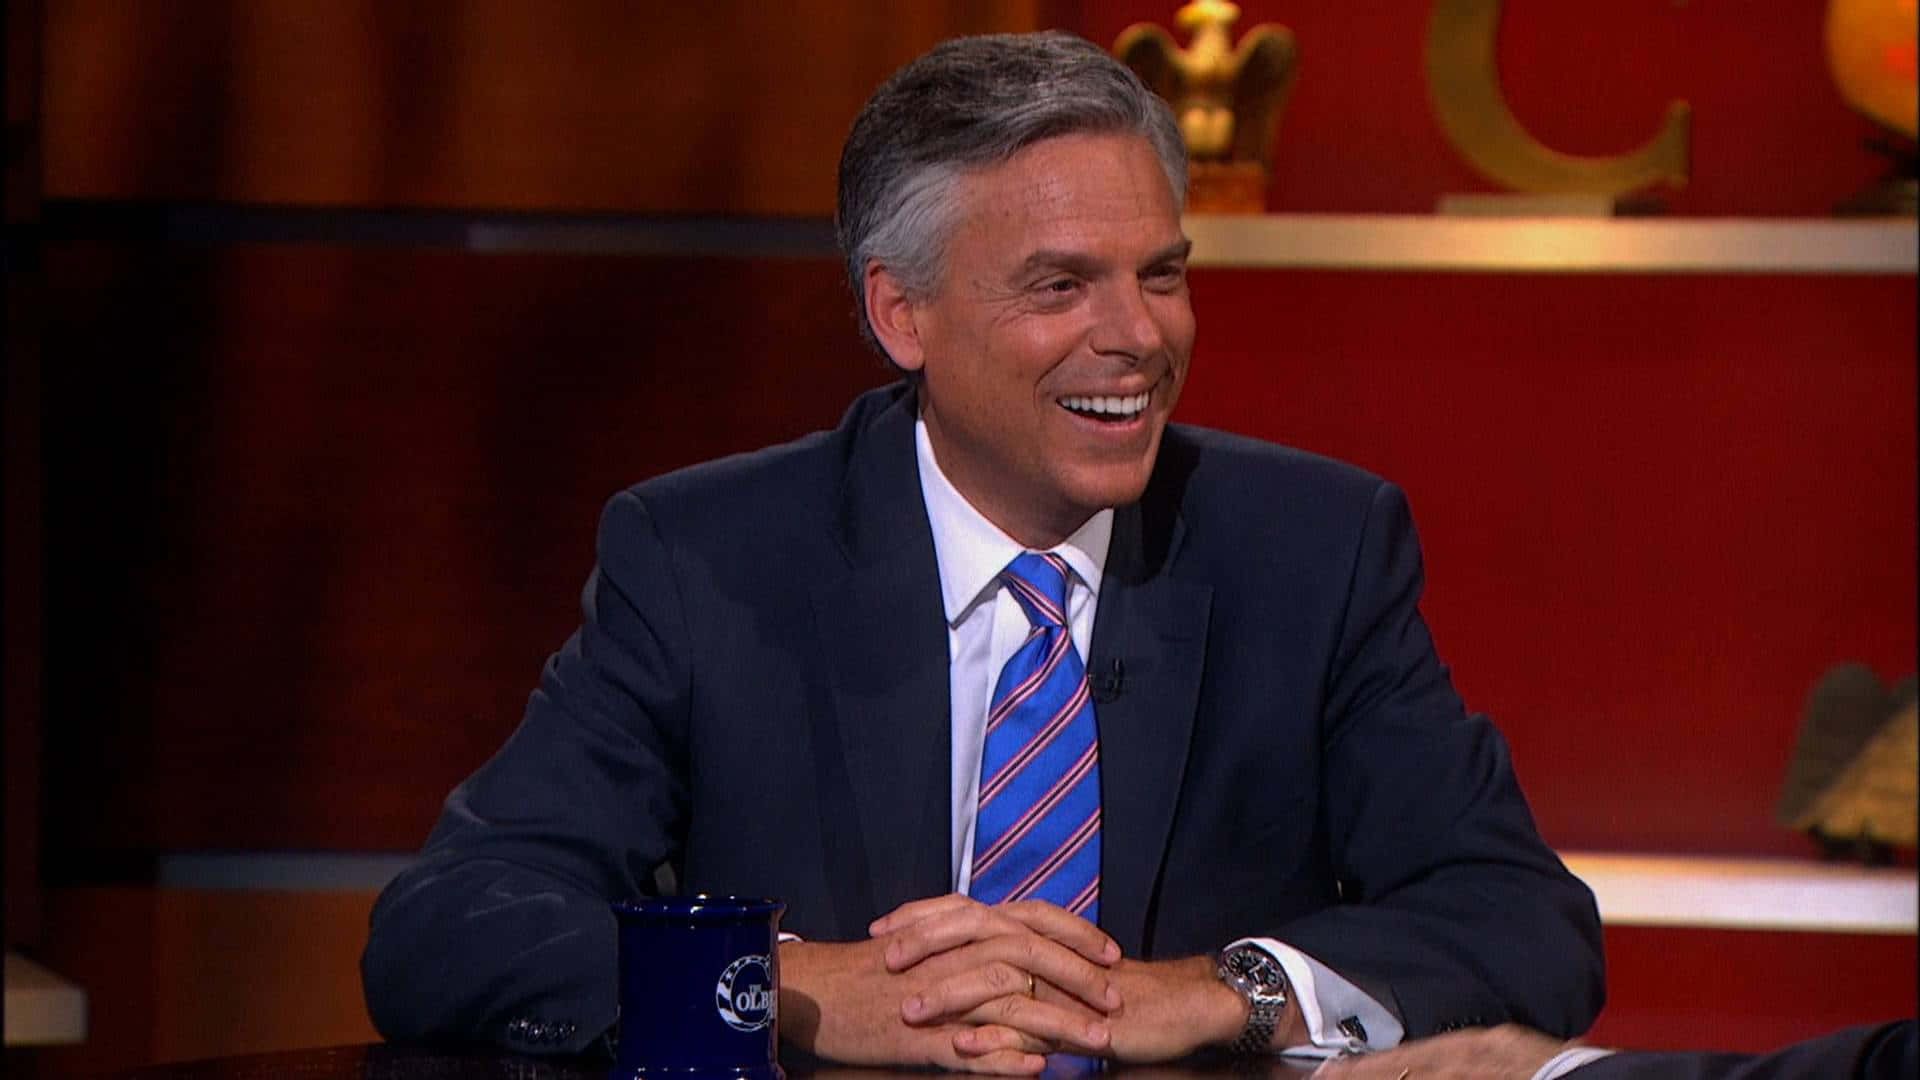 Jon Huntsman with entwined fingers in thought Wallpaper